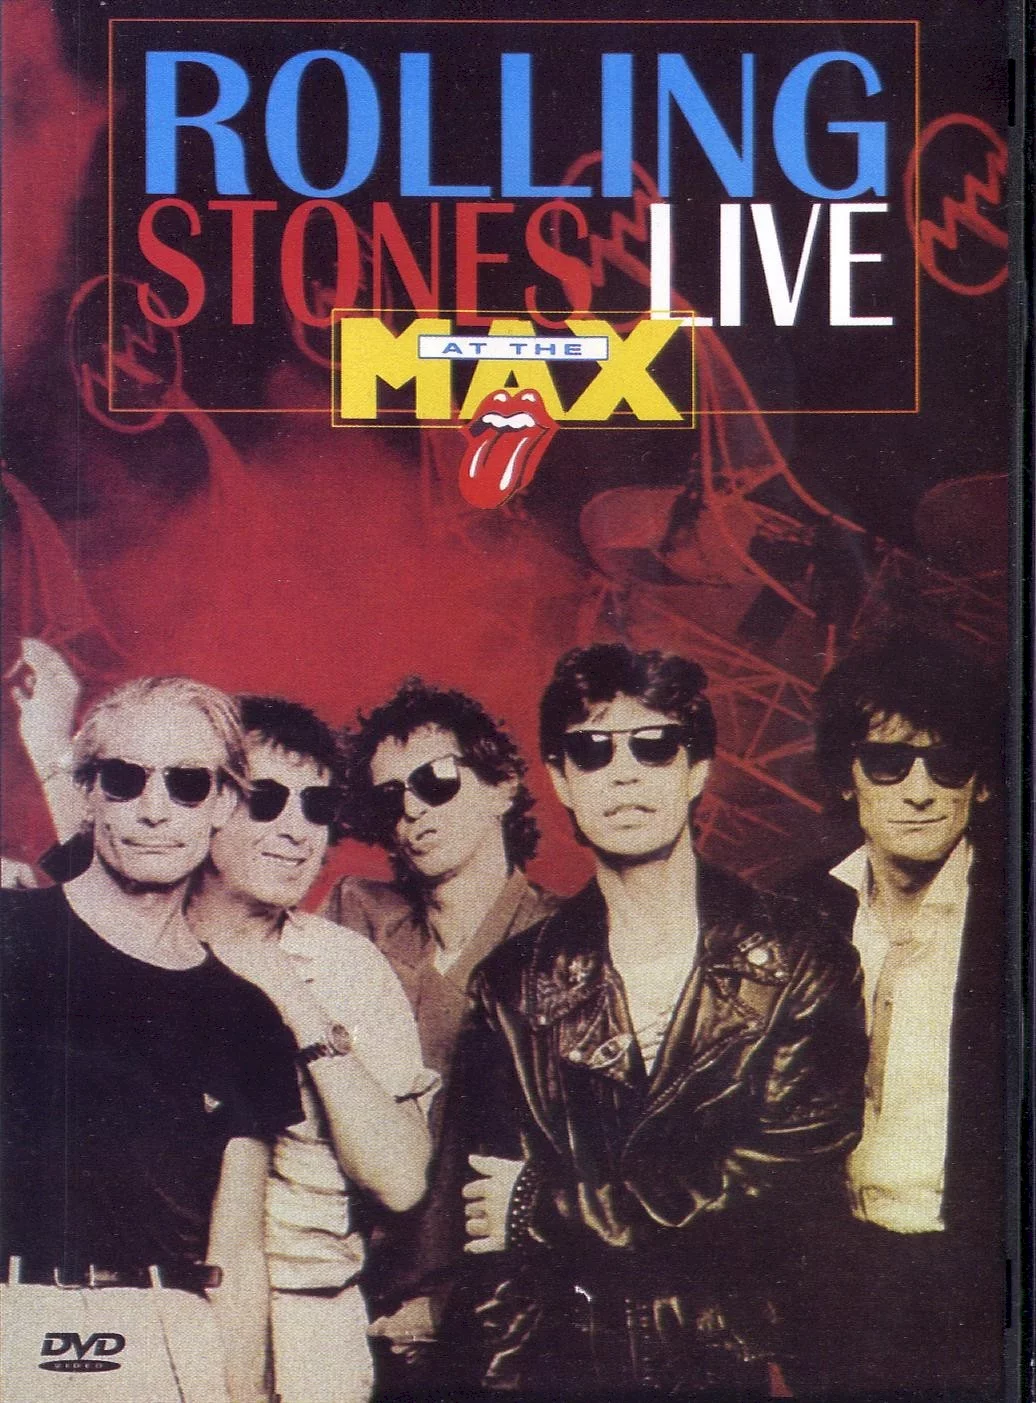 Photo 1 du film : The rolling stones at the max